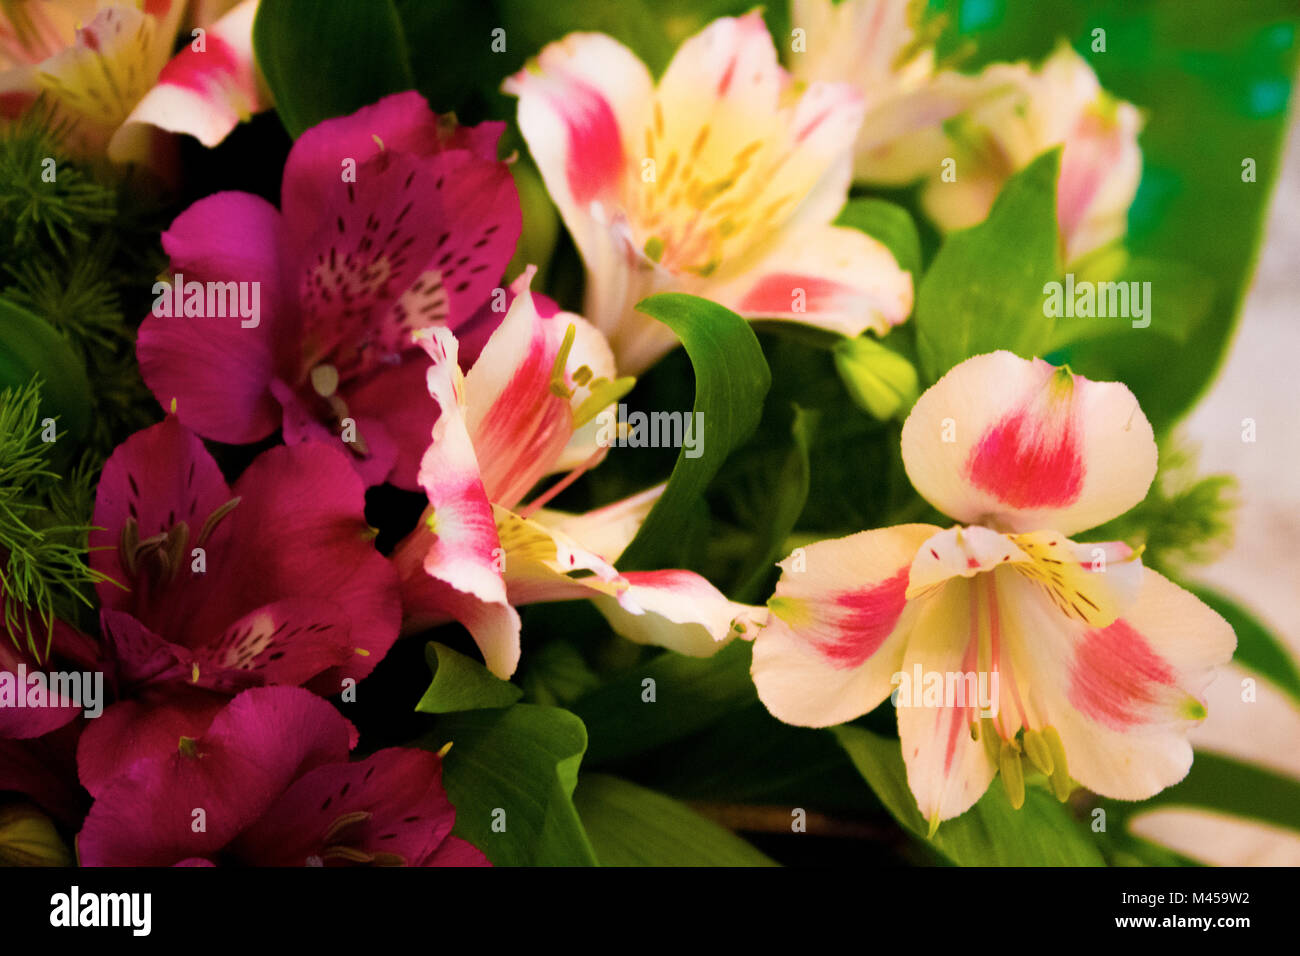 It is flower that is so colorful and beautiful Stock Photo